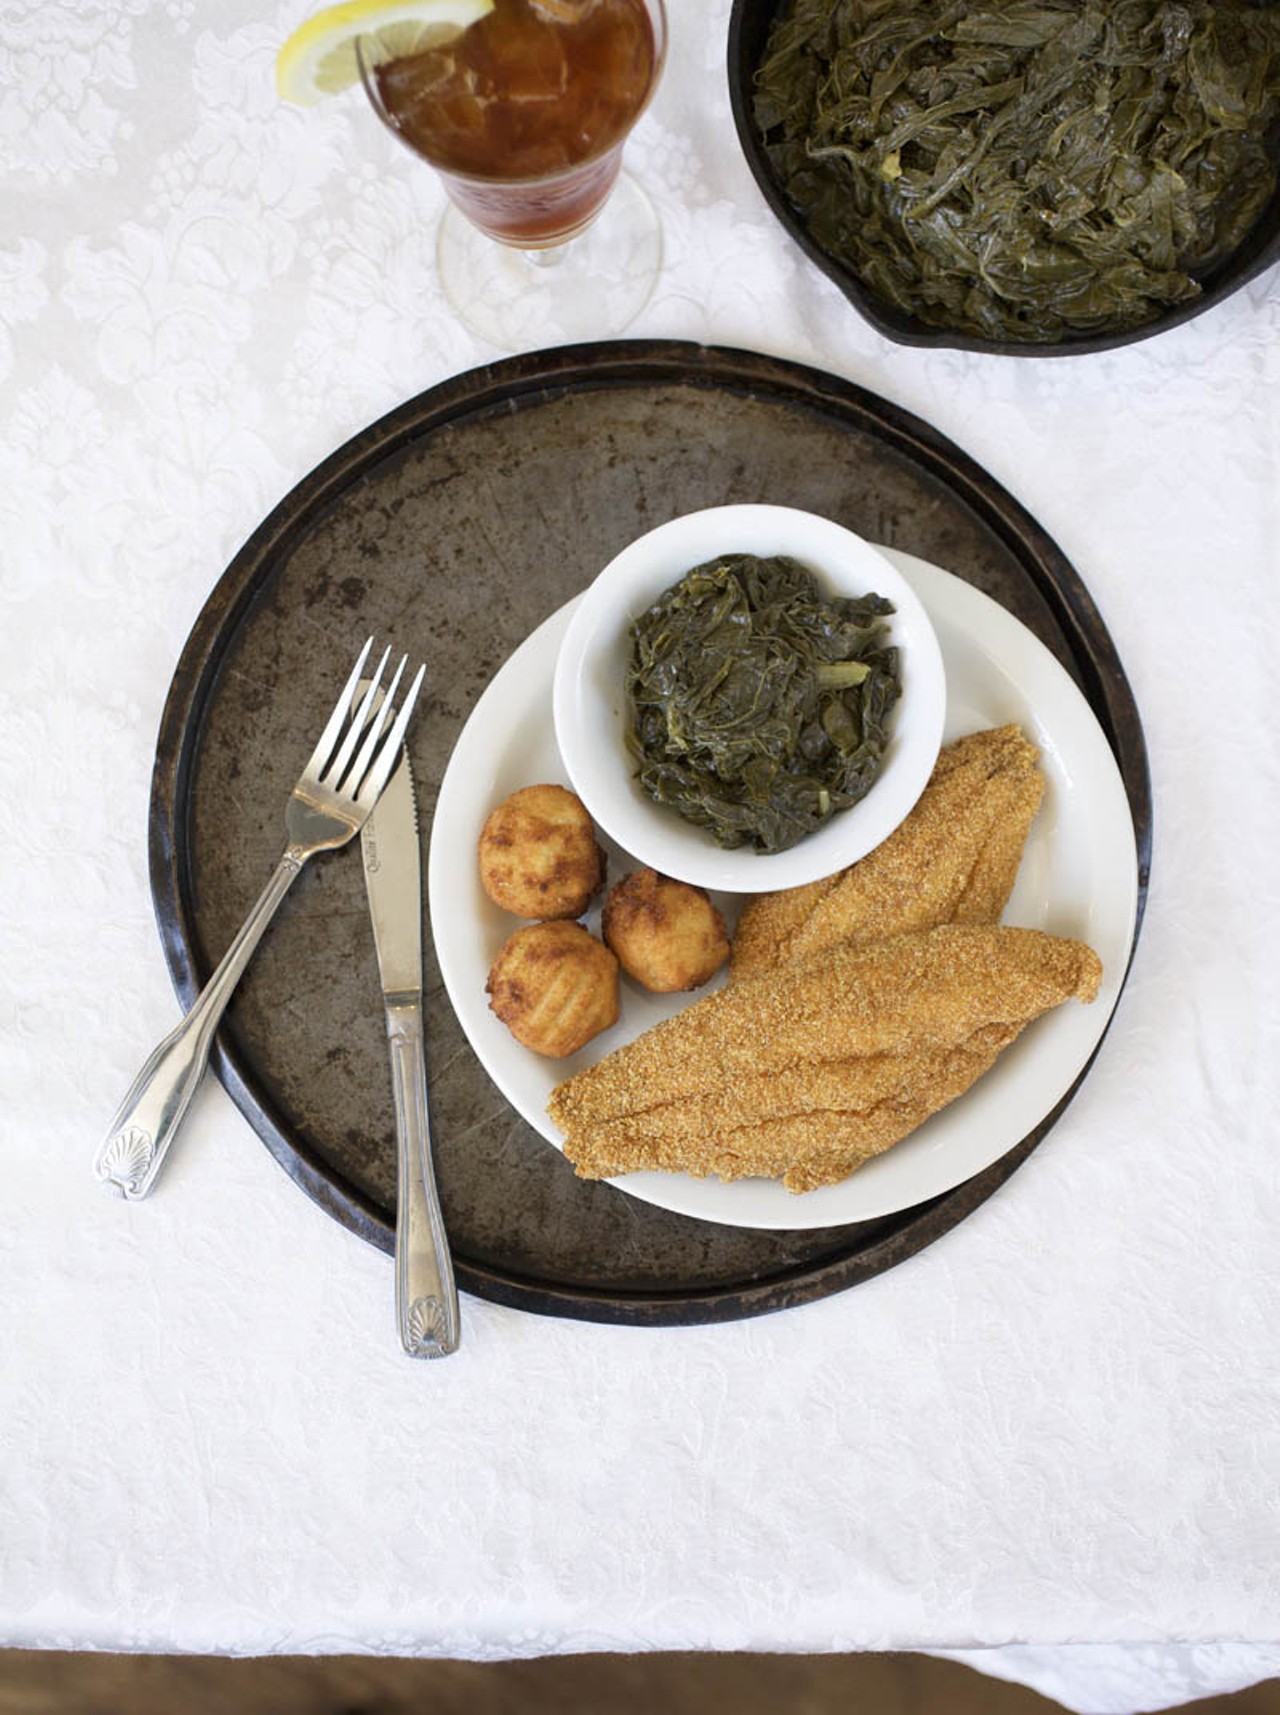 The Fingerlickin Fish comes with hushpuppies and another side of your choice. You have a choice of either catfish, fried or baked fresh tilapia filets. Here, it is shown with the catfish and the side choice of turnip greens. Also shown is the house sweet tea.